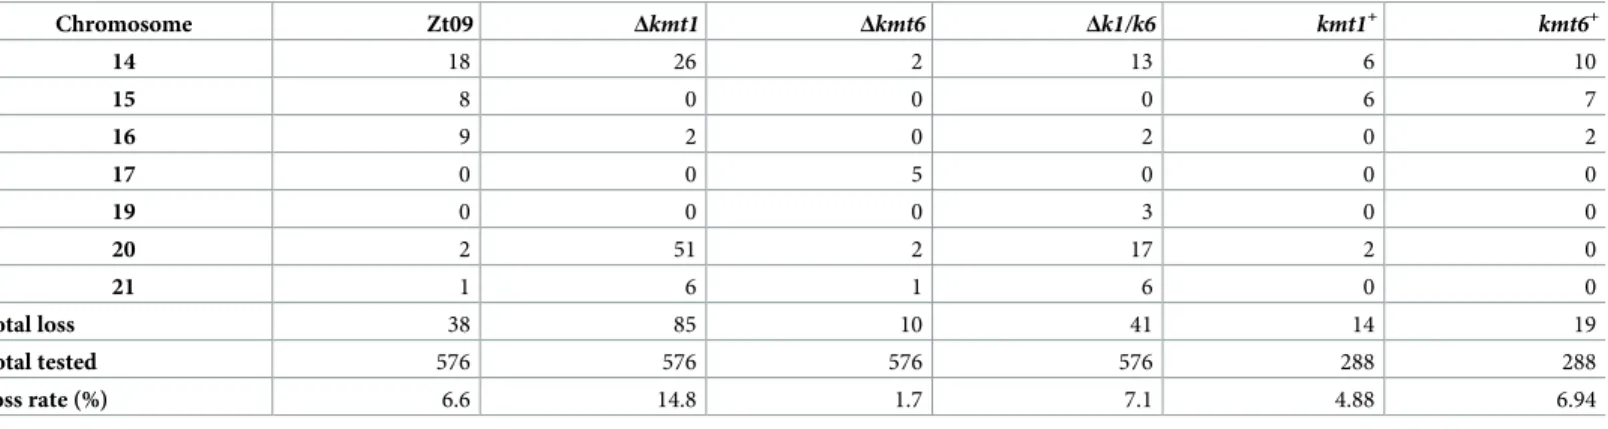 Table 2. Chromosome loss rates and frequency of individual accessory chromosome losses in the Zt09 1 reference strain and mutants during short-term evolution experiments